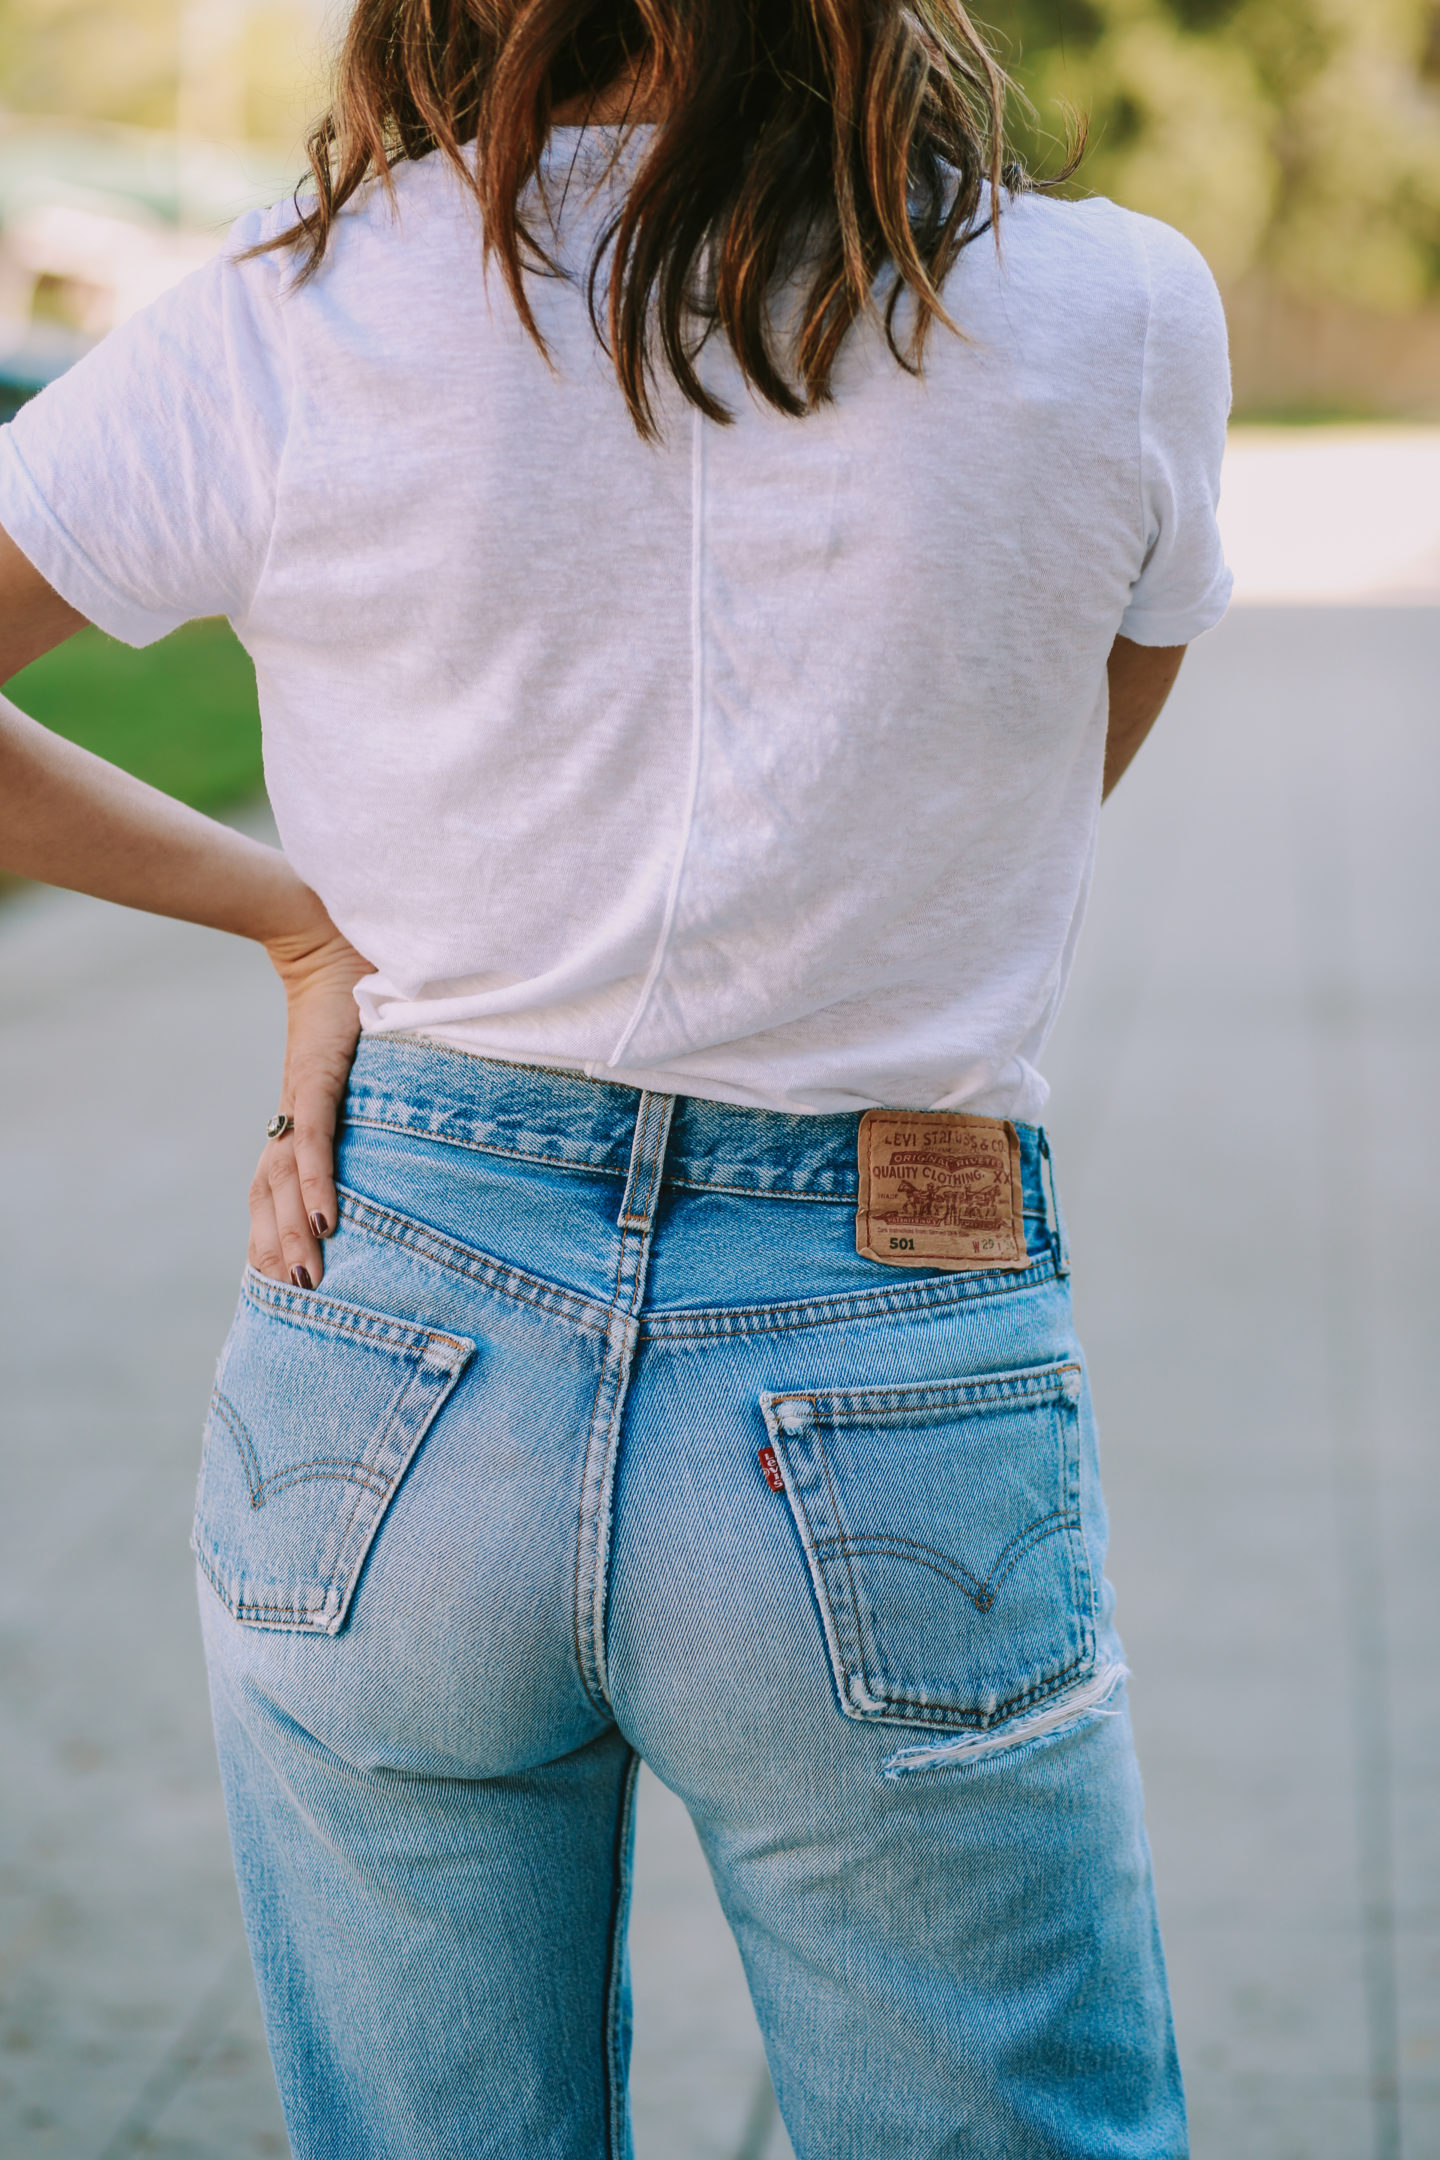 P R O D U C T : Levi's Vintage Clothing Denim Fit Guide – Pickings and Parry